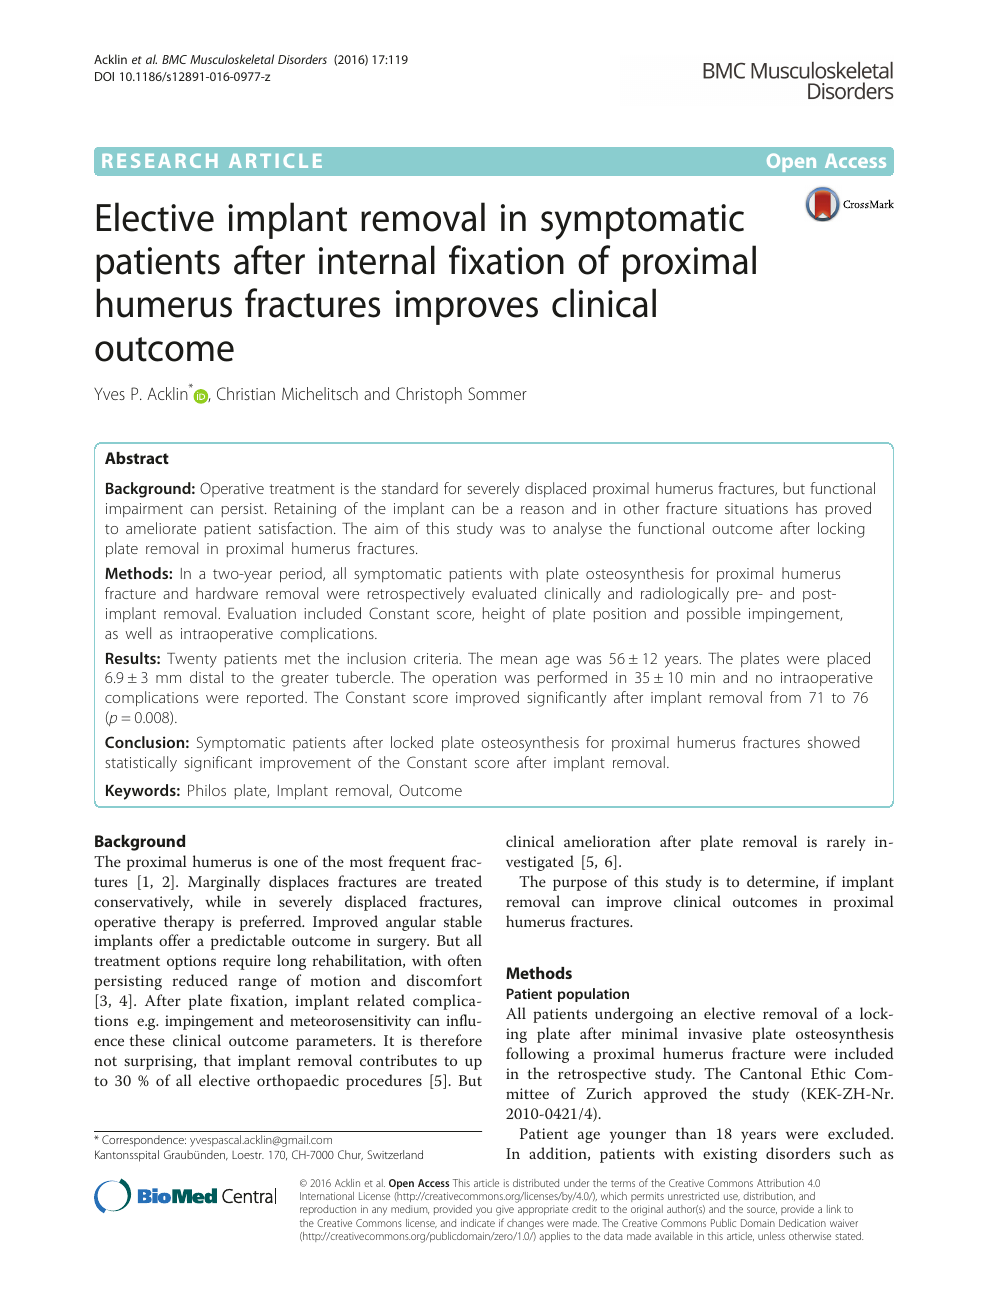 Elective Implant Removal In Symptomatic Patients After Internal Fixation Of Proximal Humerus Fractures Improves Clinical Outcome Topic Of Research Paper In Clinical Medicine Download Scholarly Article Pdf And Read For Free